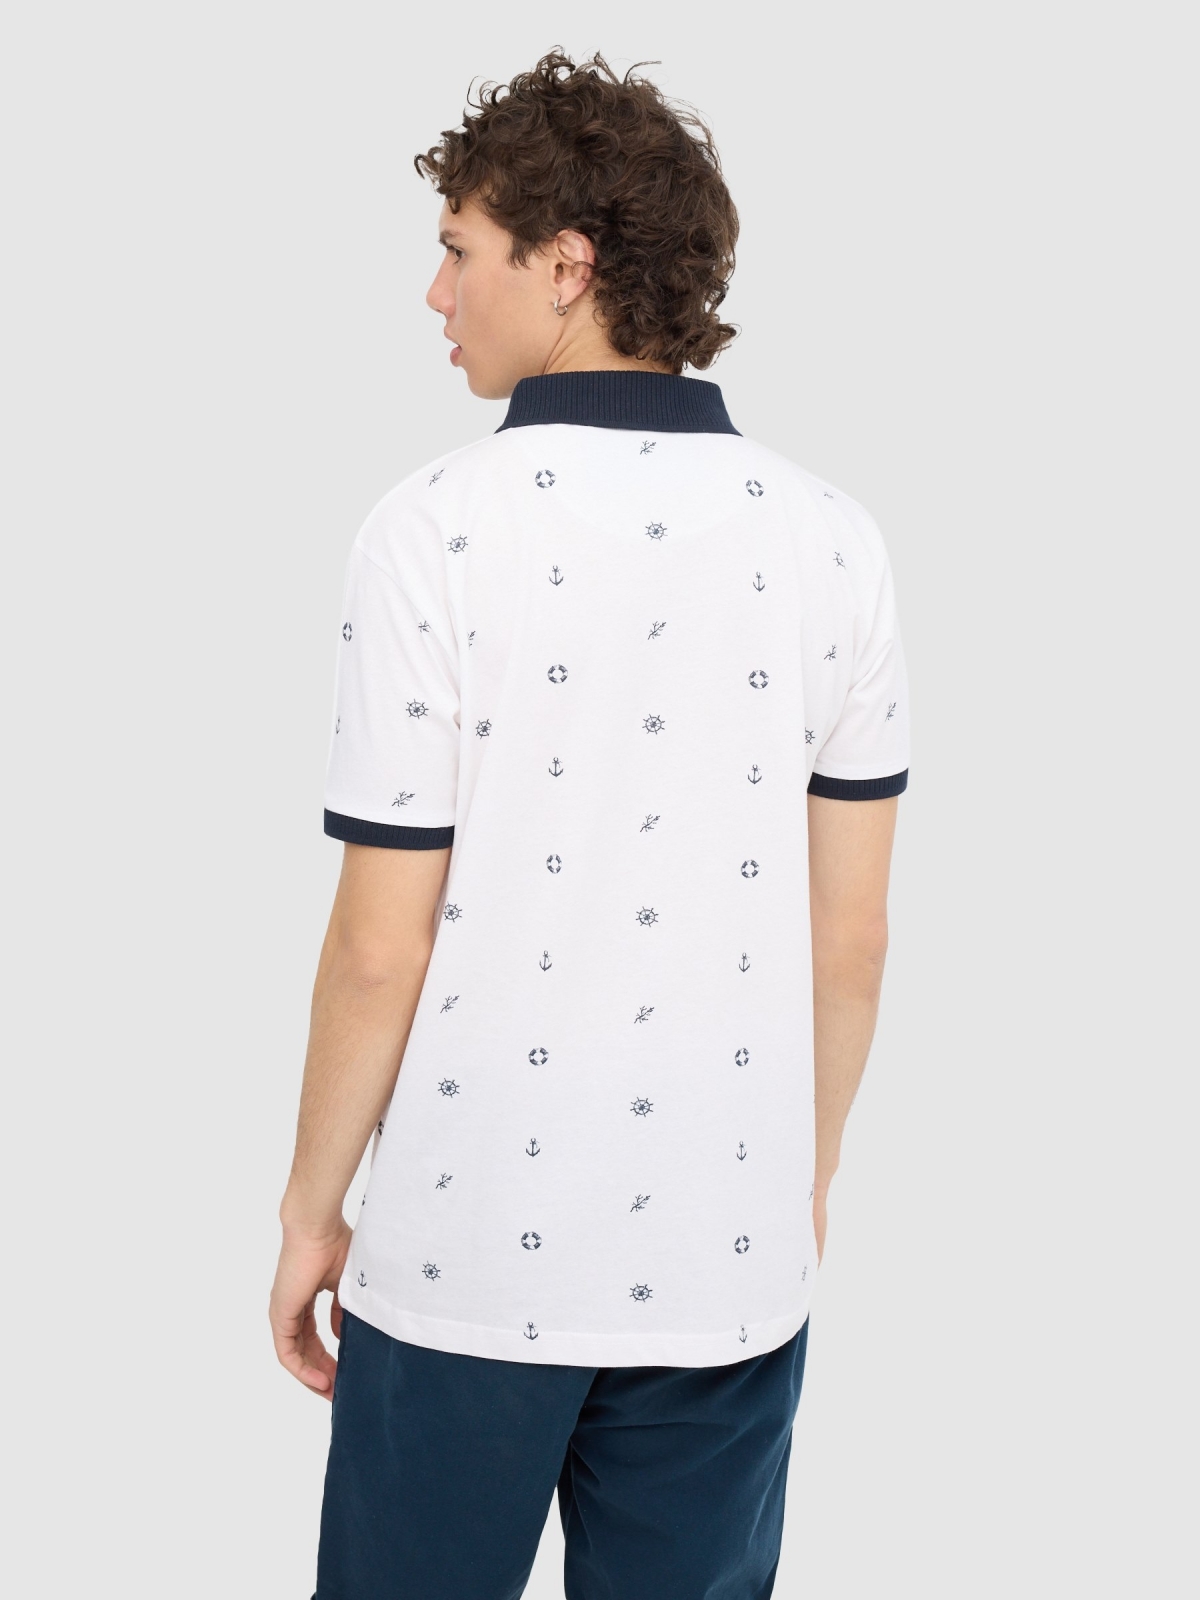 Sailor polo shirt white middle back view